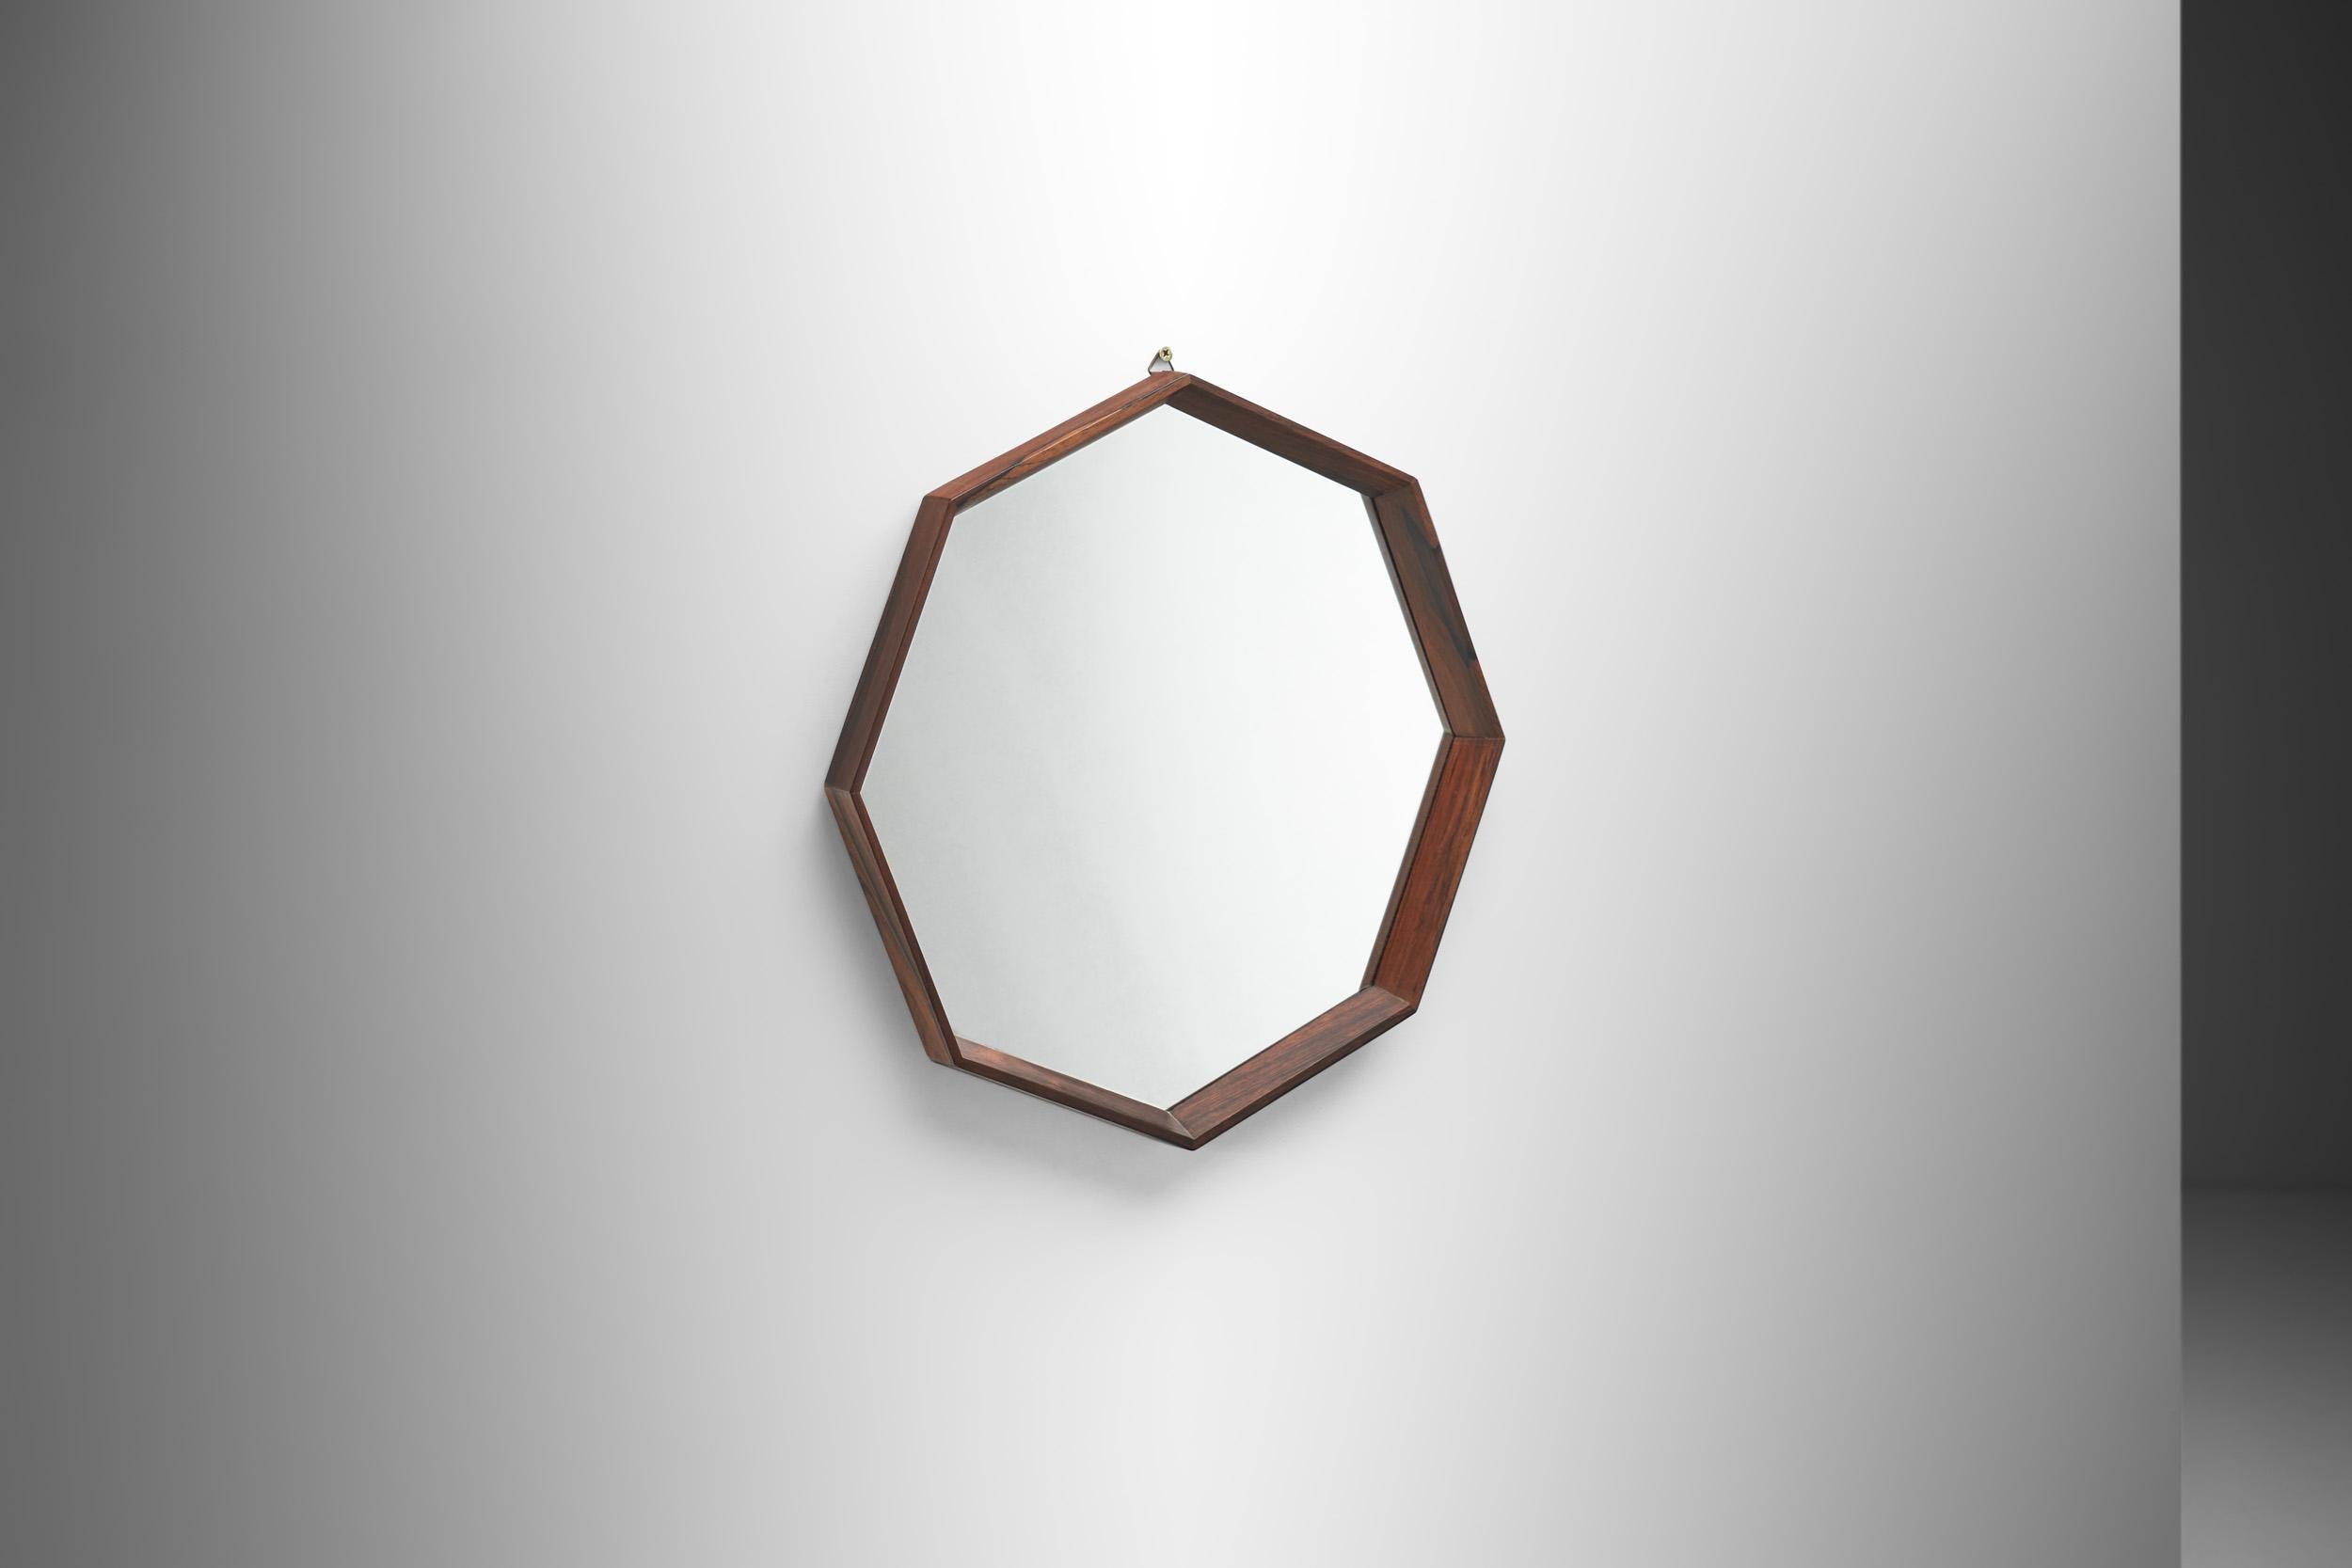 Mirrors are versatile pieces of interior décor with several functions and advantages; they create depth, increase light coverage, and add a statement to any space. This octagonal Danish accent mirror is perfect to create a focal point in a